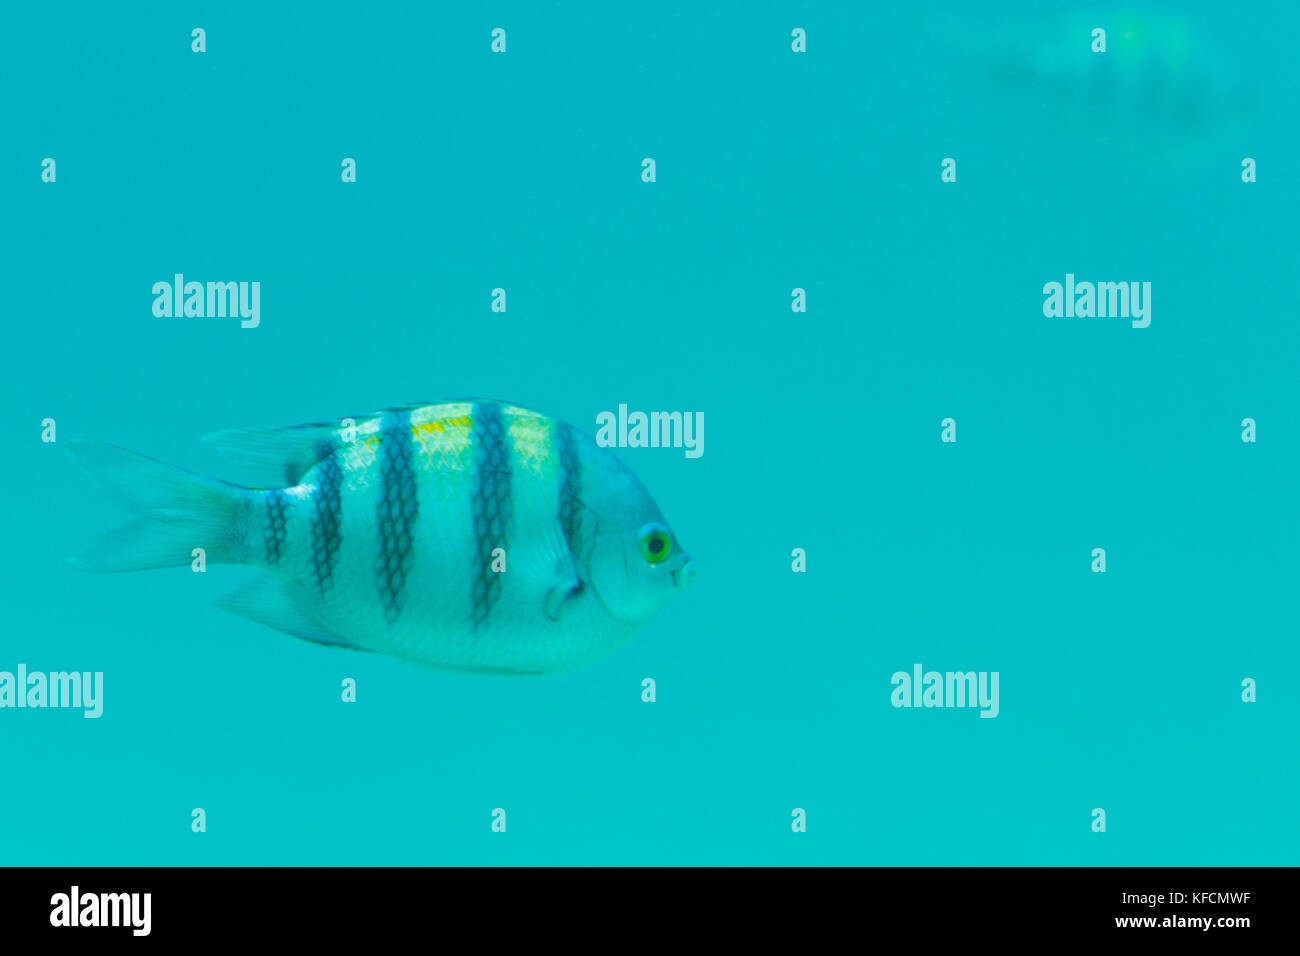 striped fish in deep blue water Stock Photo